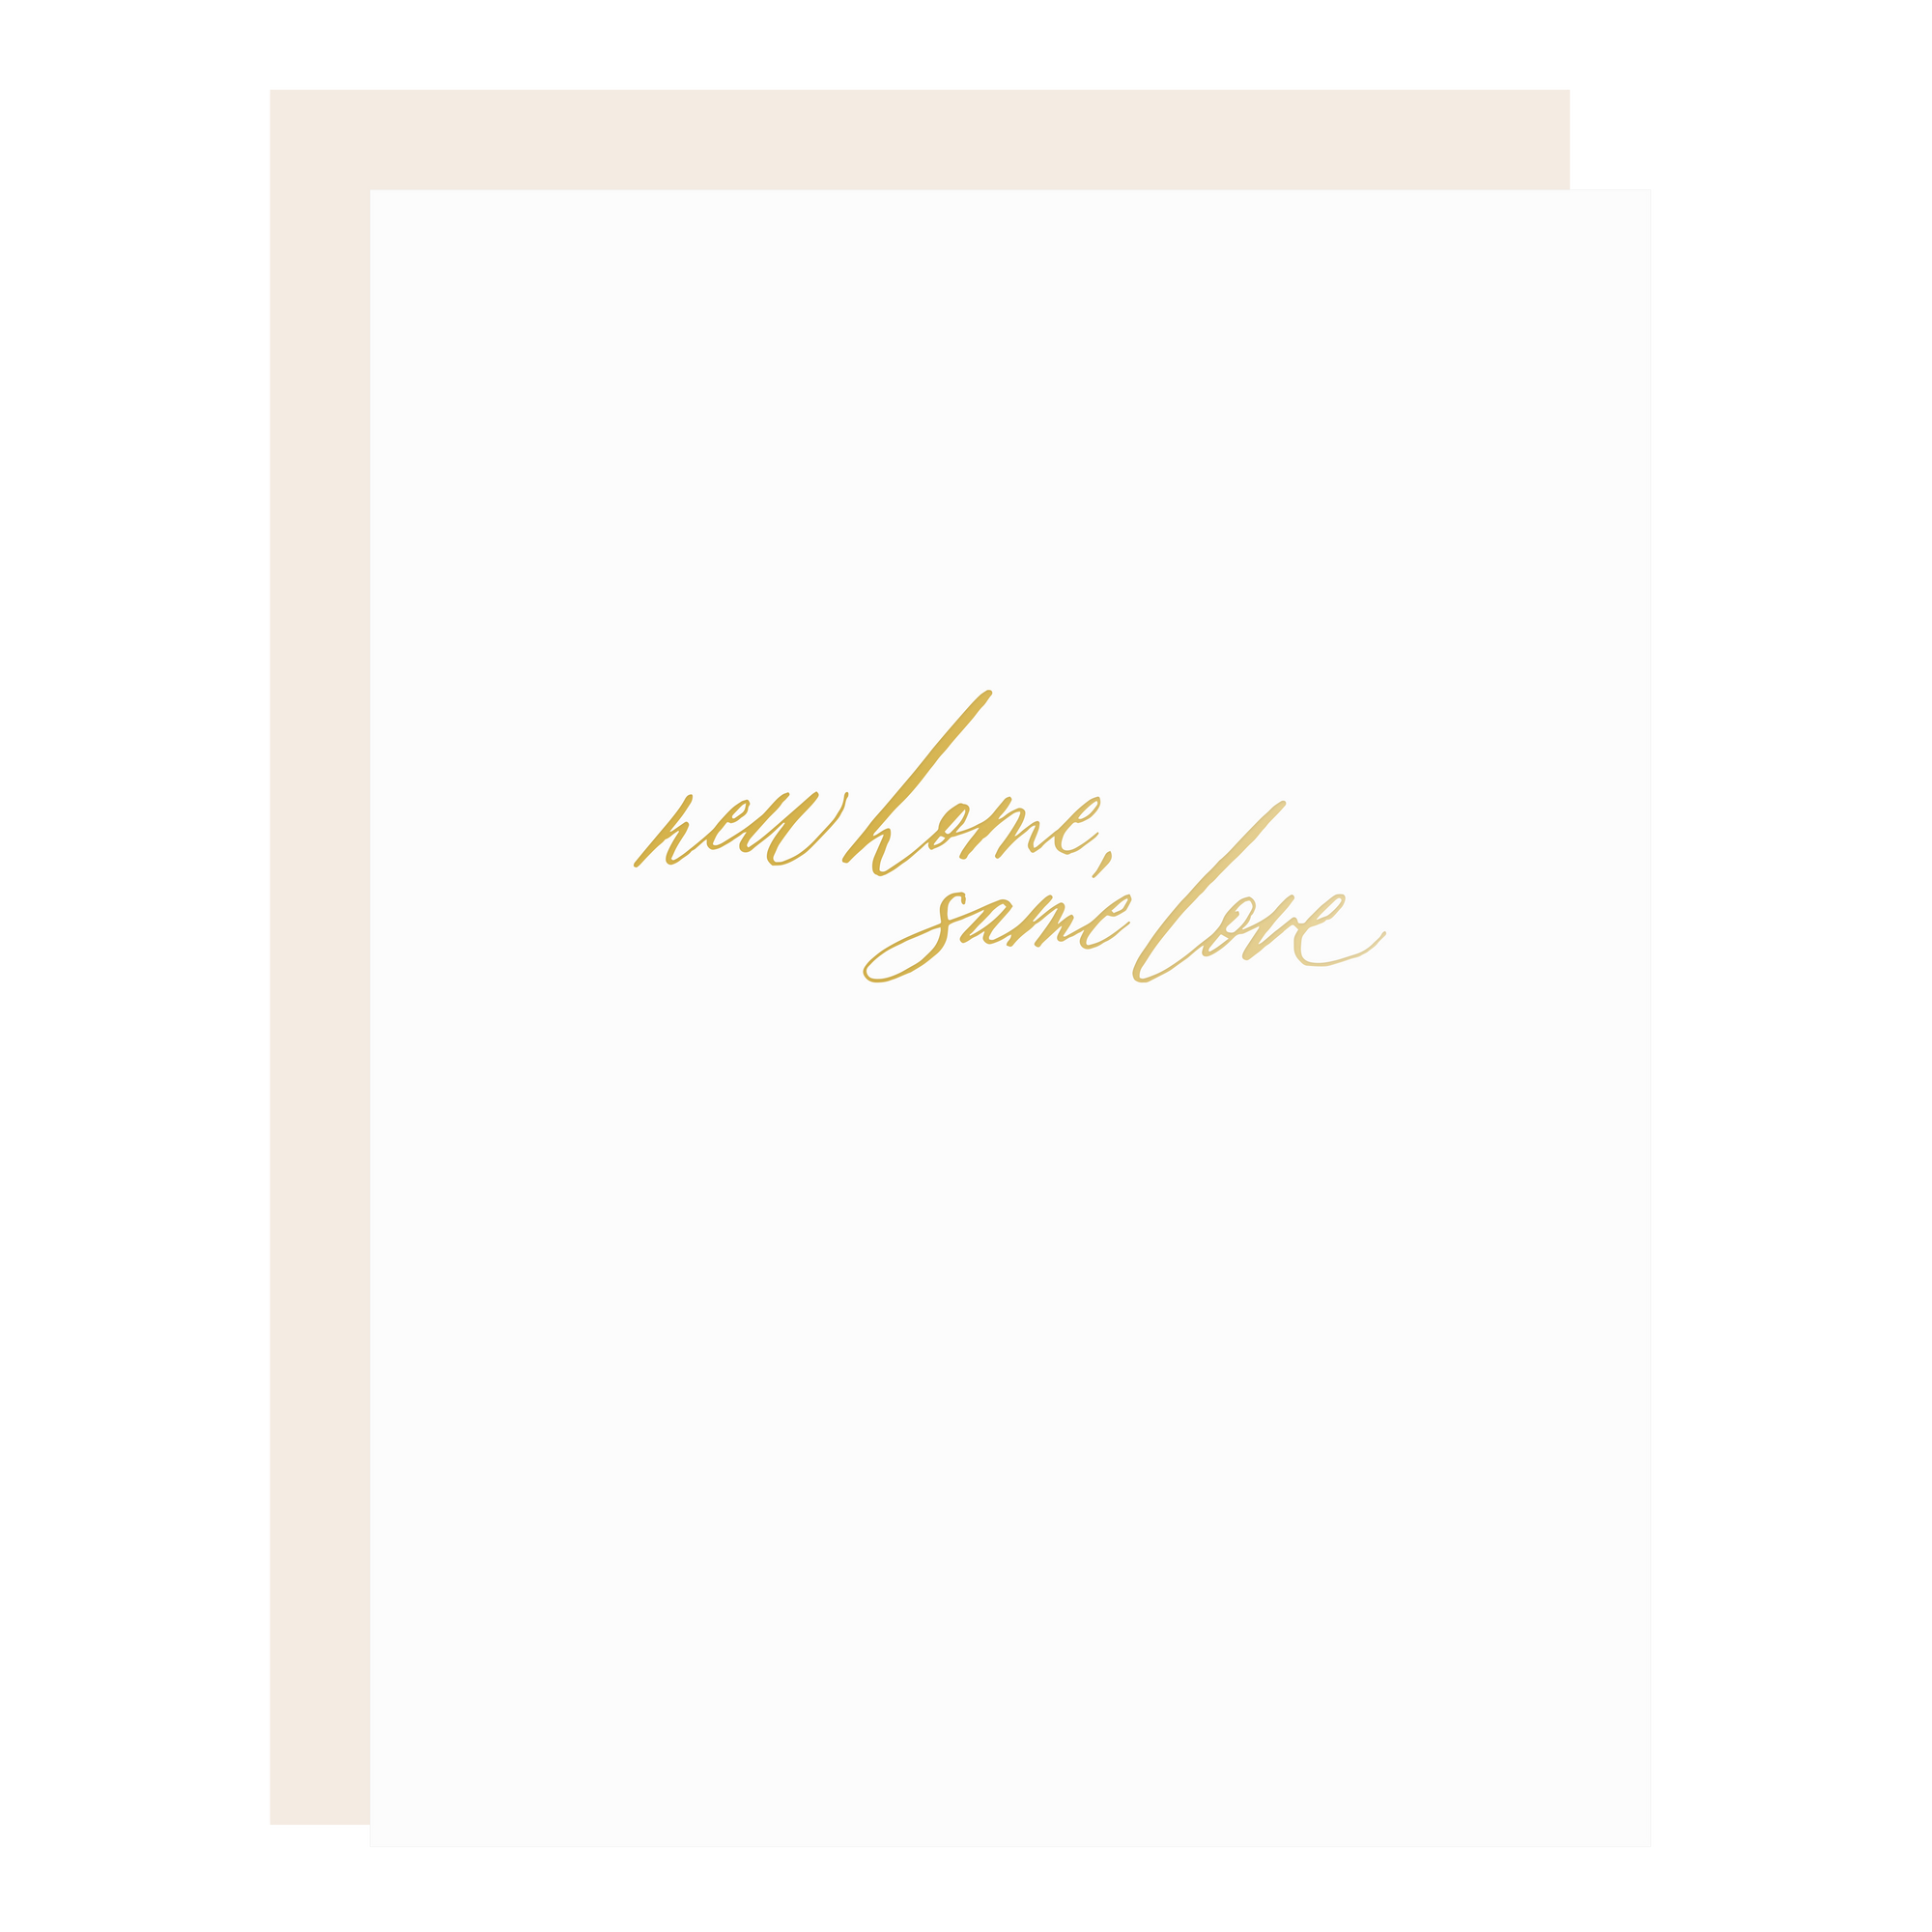 "New Home, Same Love" card, letterpress printed by hand in gold foil. 